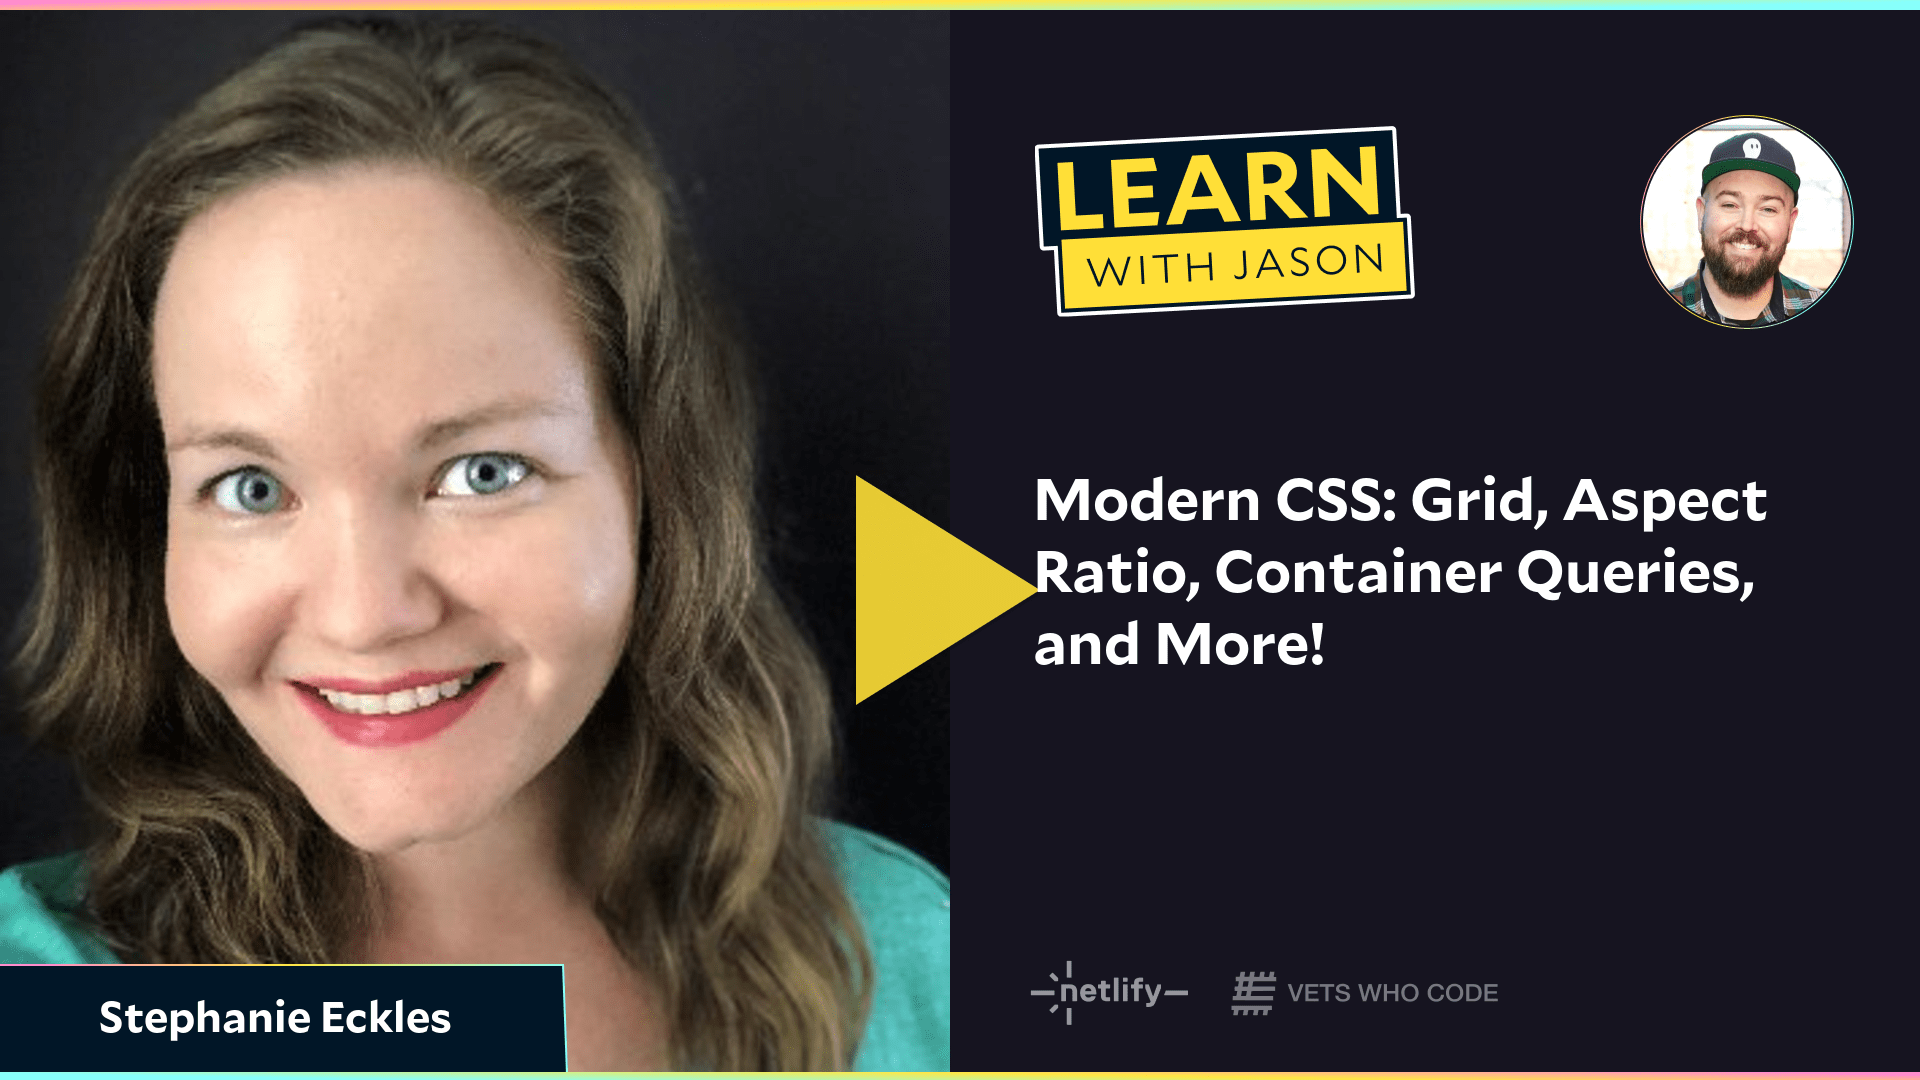 Modern CSS: Grid, Aspect Ratio, Container Queries, and More! (with Stephanie Eckles)